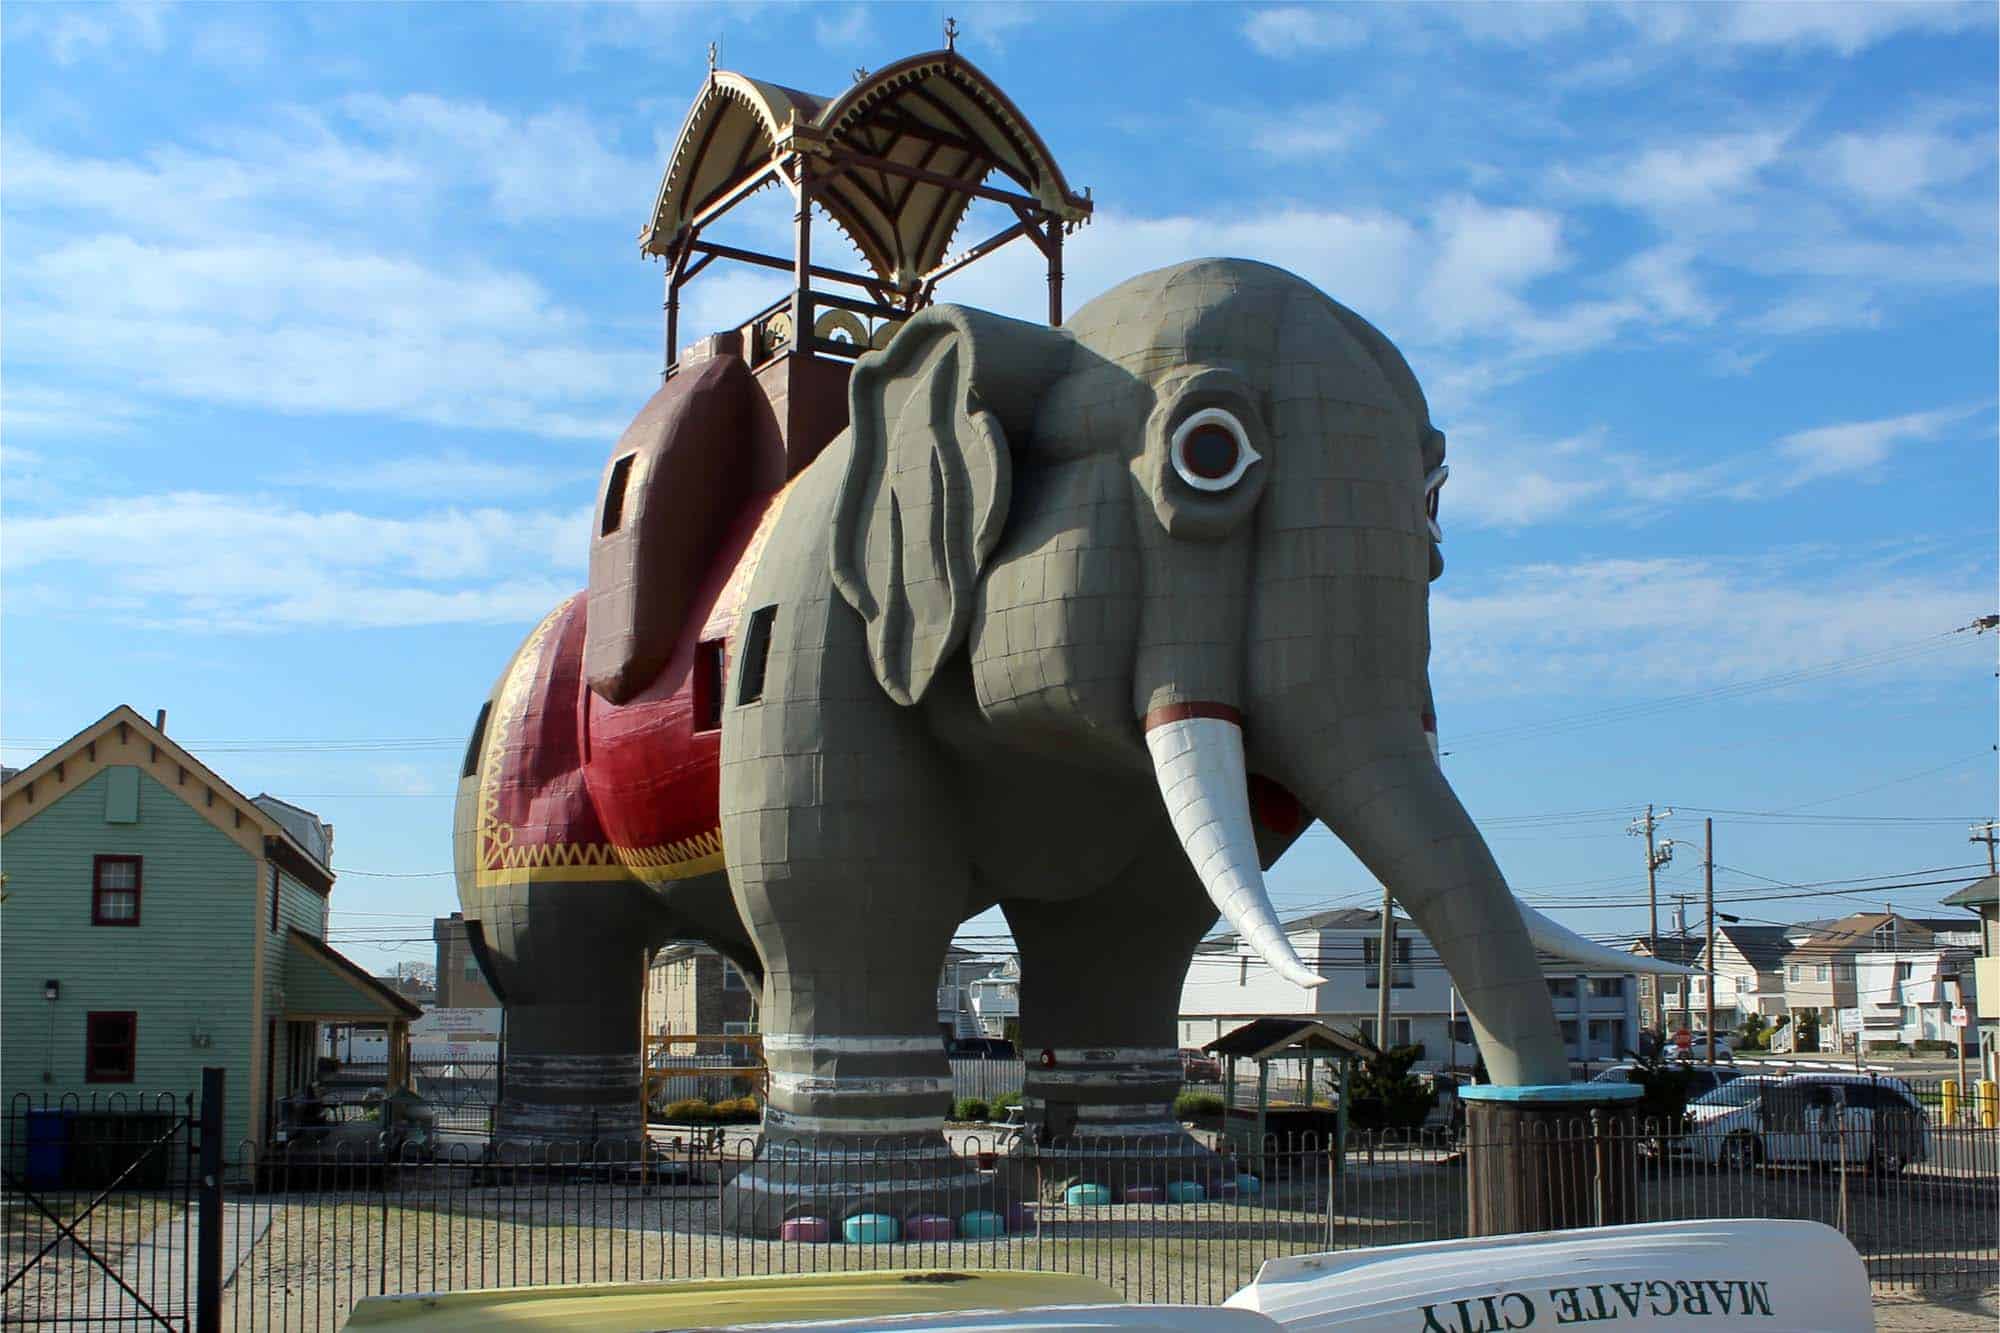 65-foot-tall gray structure shaped like an elephant